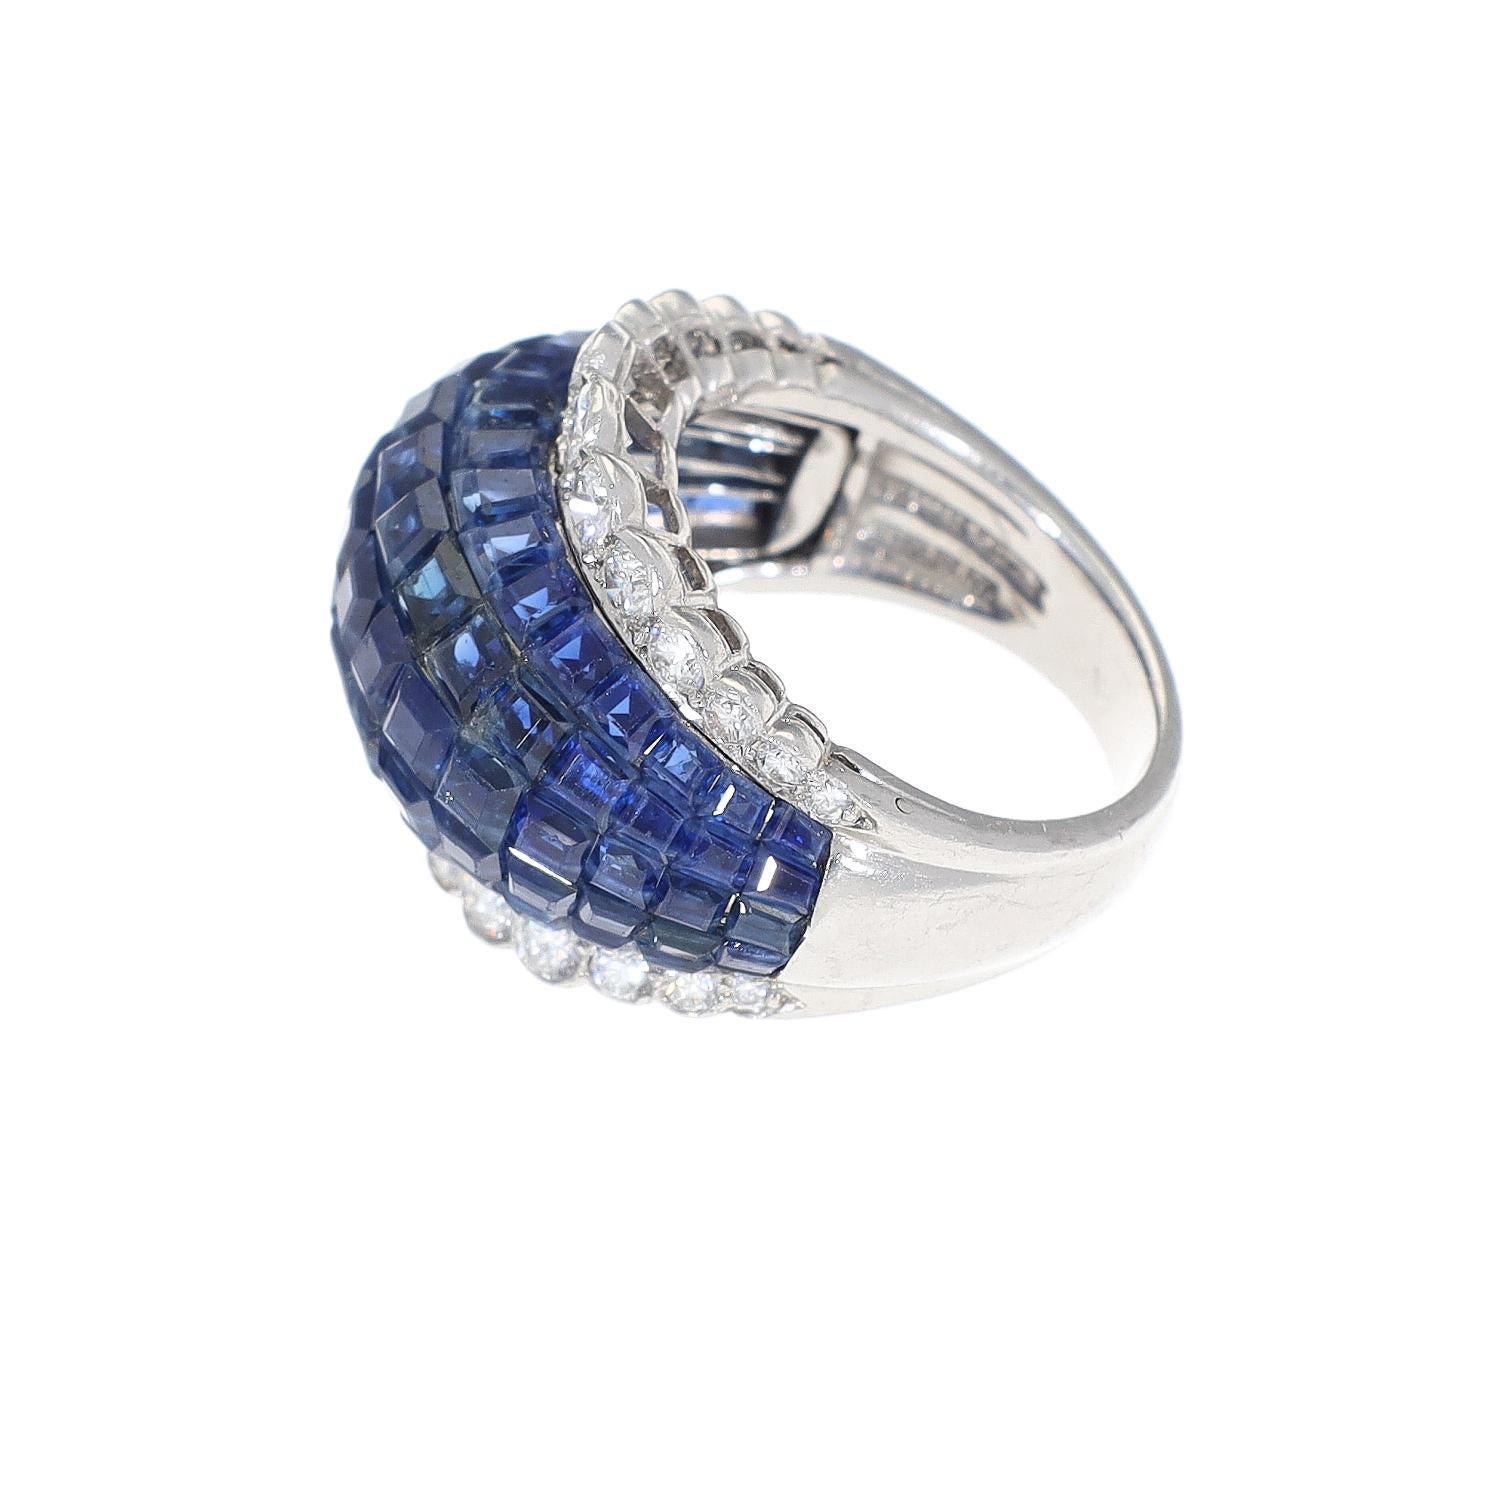 
Van Cleef & Arpels Paris Vintage Invisibly Set Diamond Sapphire  Boule Ring From Our Signed Jewels Vintage Collection.
 Platinum. Fully signed Van Cleef & Arpels and marked.
  SIZE- 5.75
APPROX. WIDTH- .62